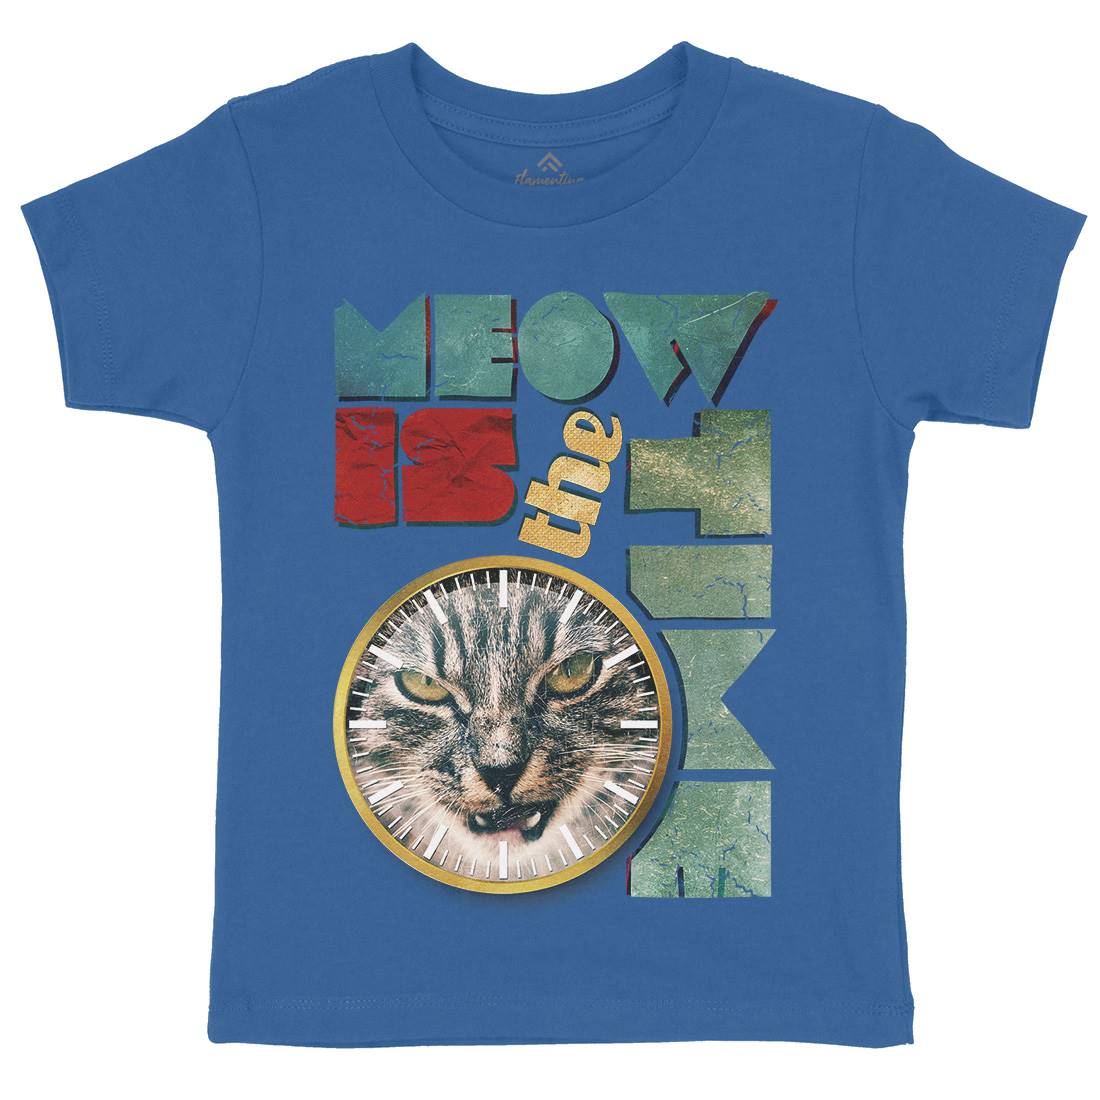 Meow Is The Time Kids Organic Crew Neck T-Shirt Animals A876